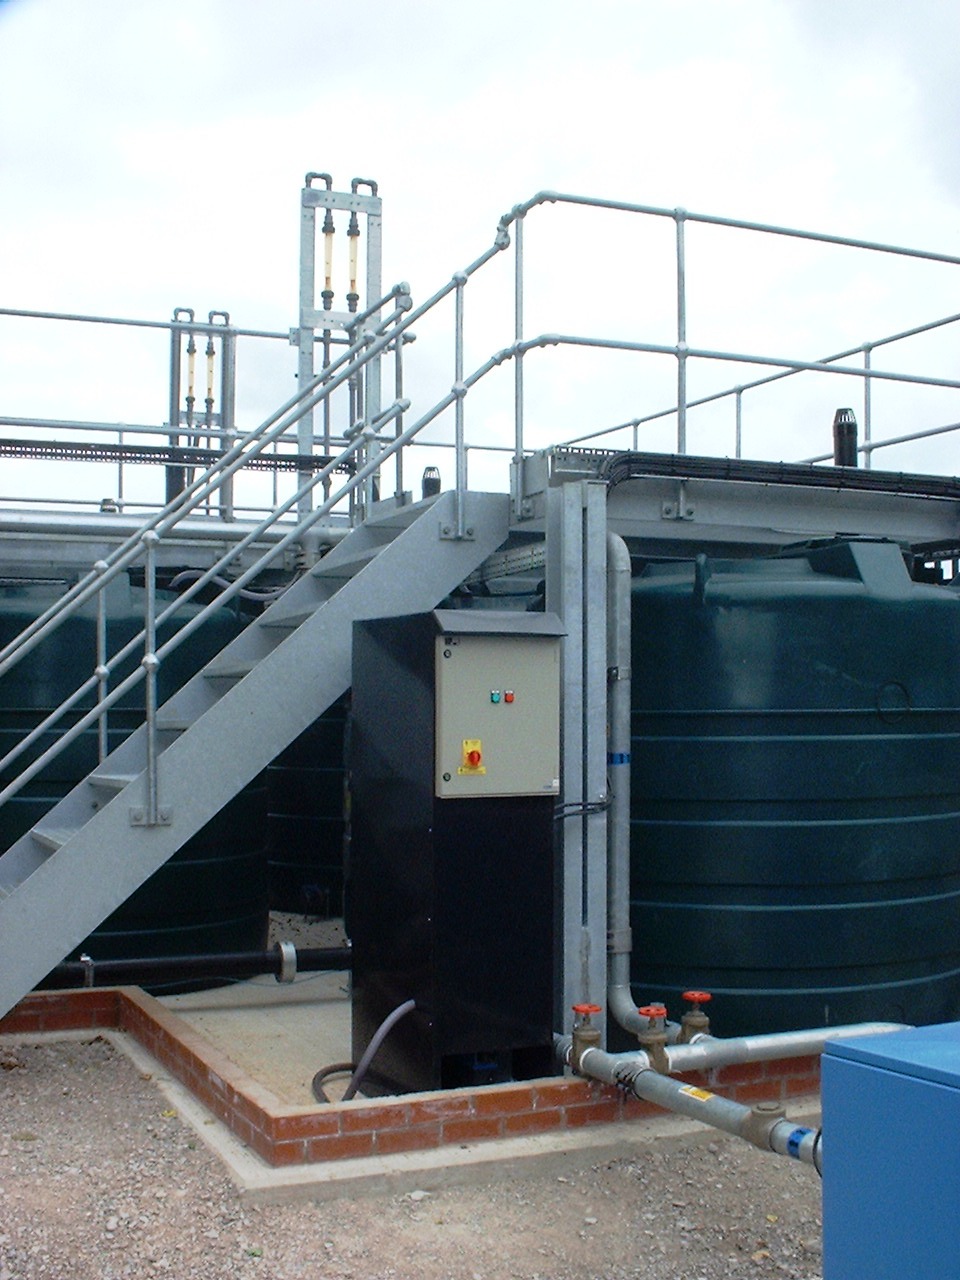 A continuously monitored methane stripping plant showing the dissolved methane monitor.